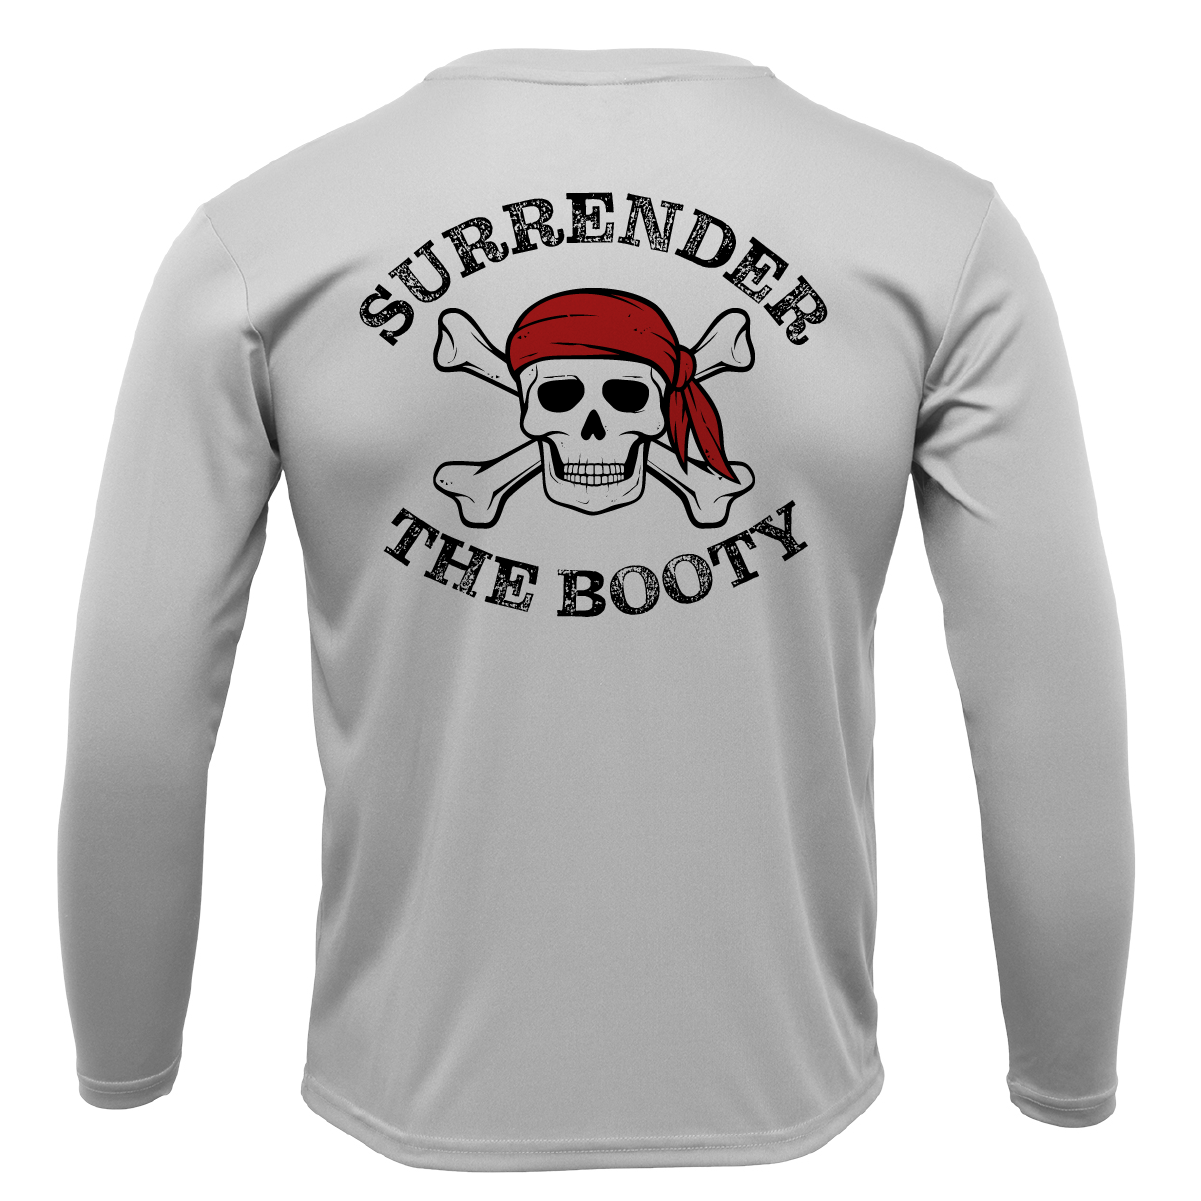 Florida Freshwater Born "Surrender The Booty" Men's Long Sleeve UPF 50+ Dry-Fit Shirt